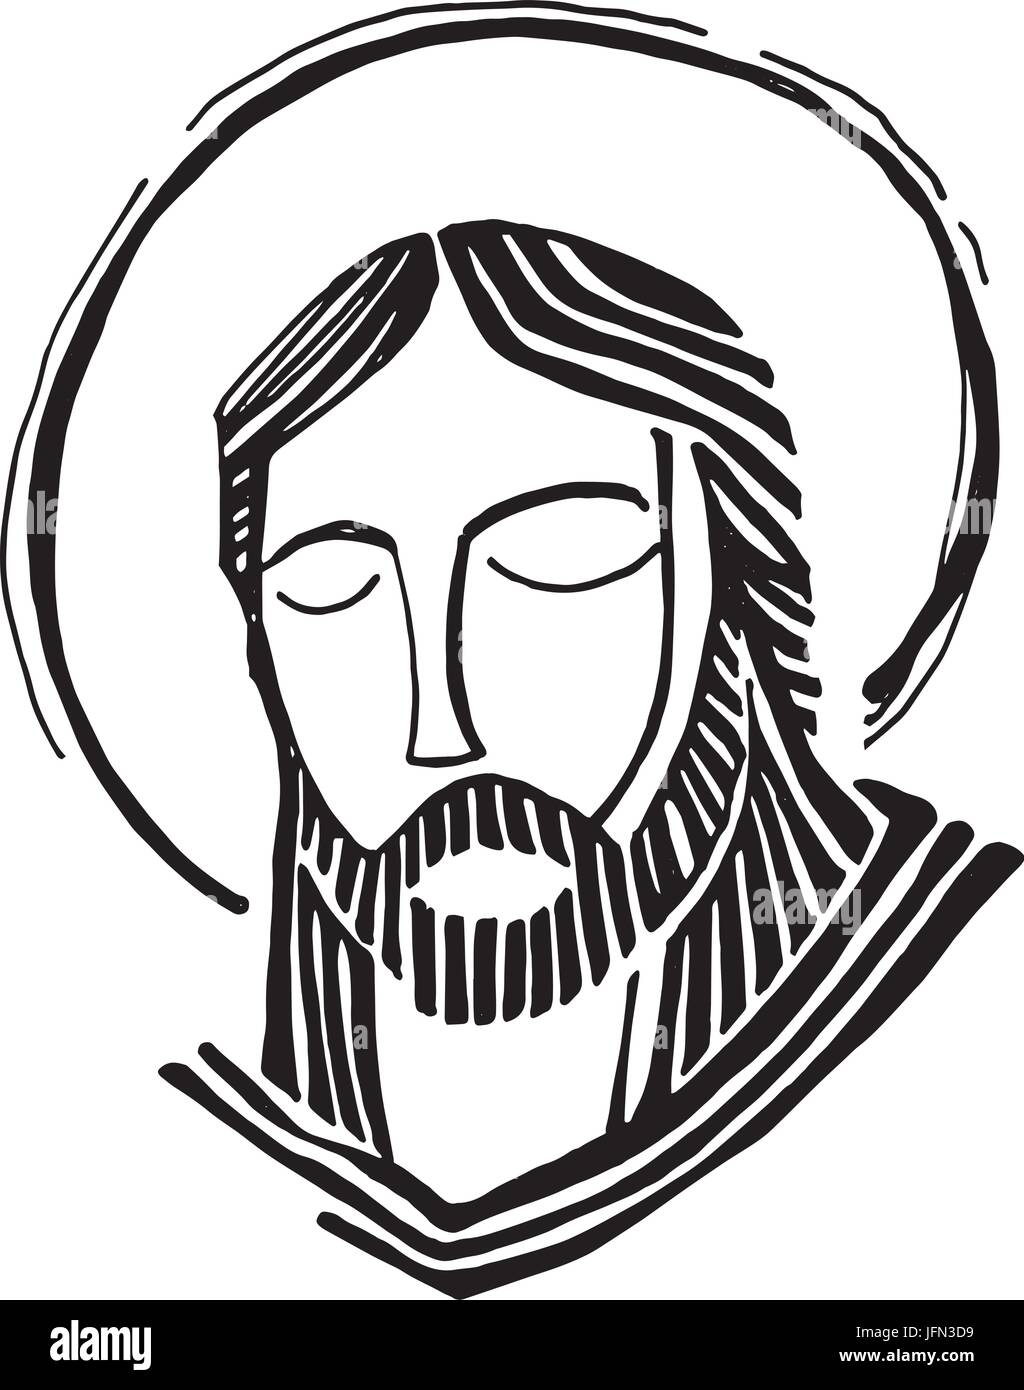 Hand drawn vector illustration or drawing of Jesus Christ Face Stock ...